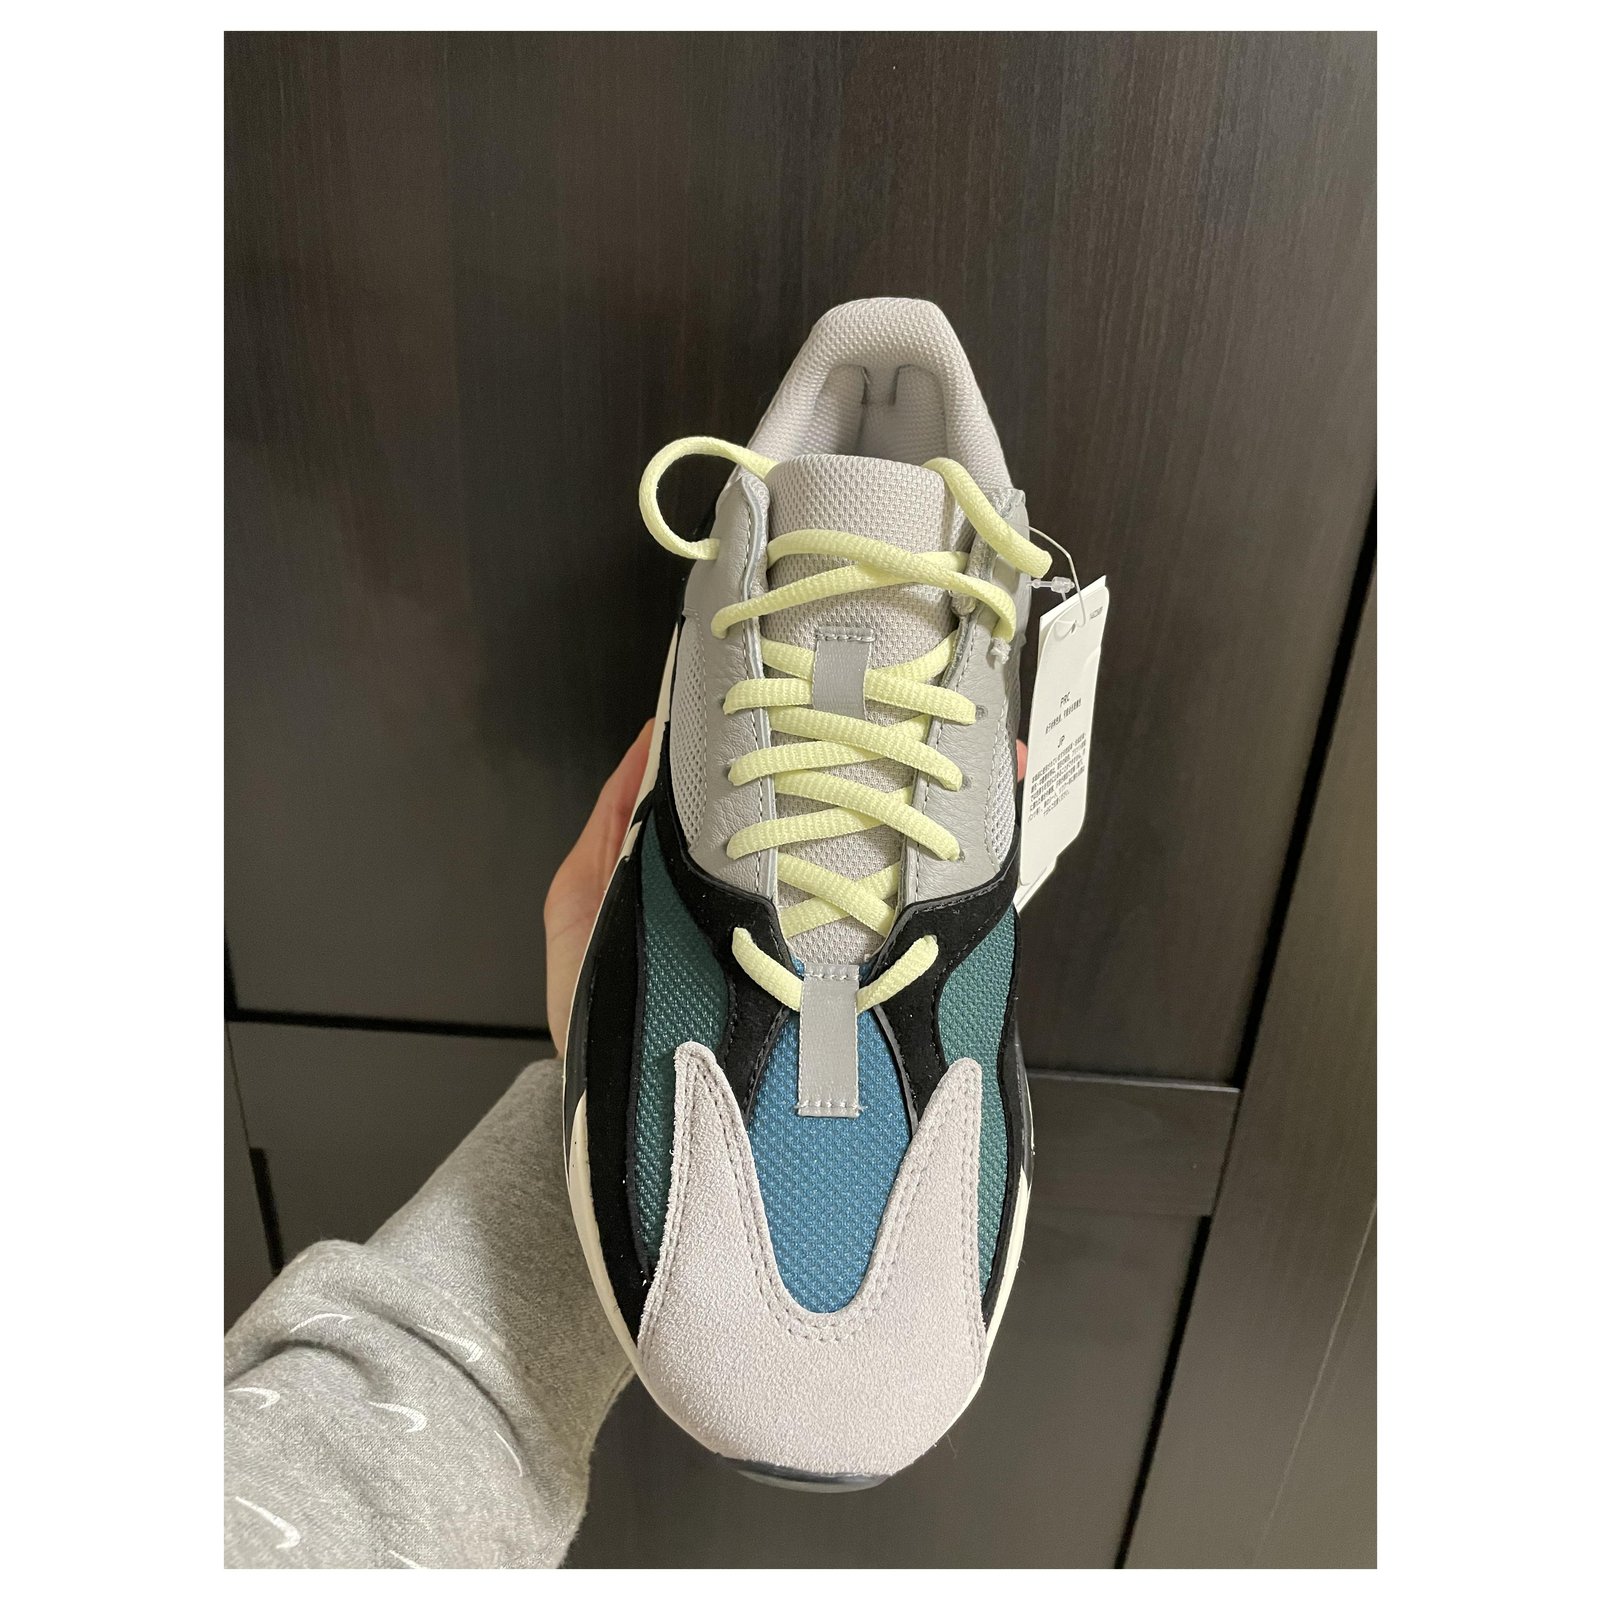 Adidas Yeezy 700 V1 Wave runner OG Multiple colors Synthetic Cloth ...